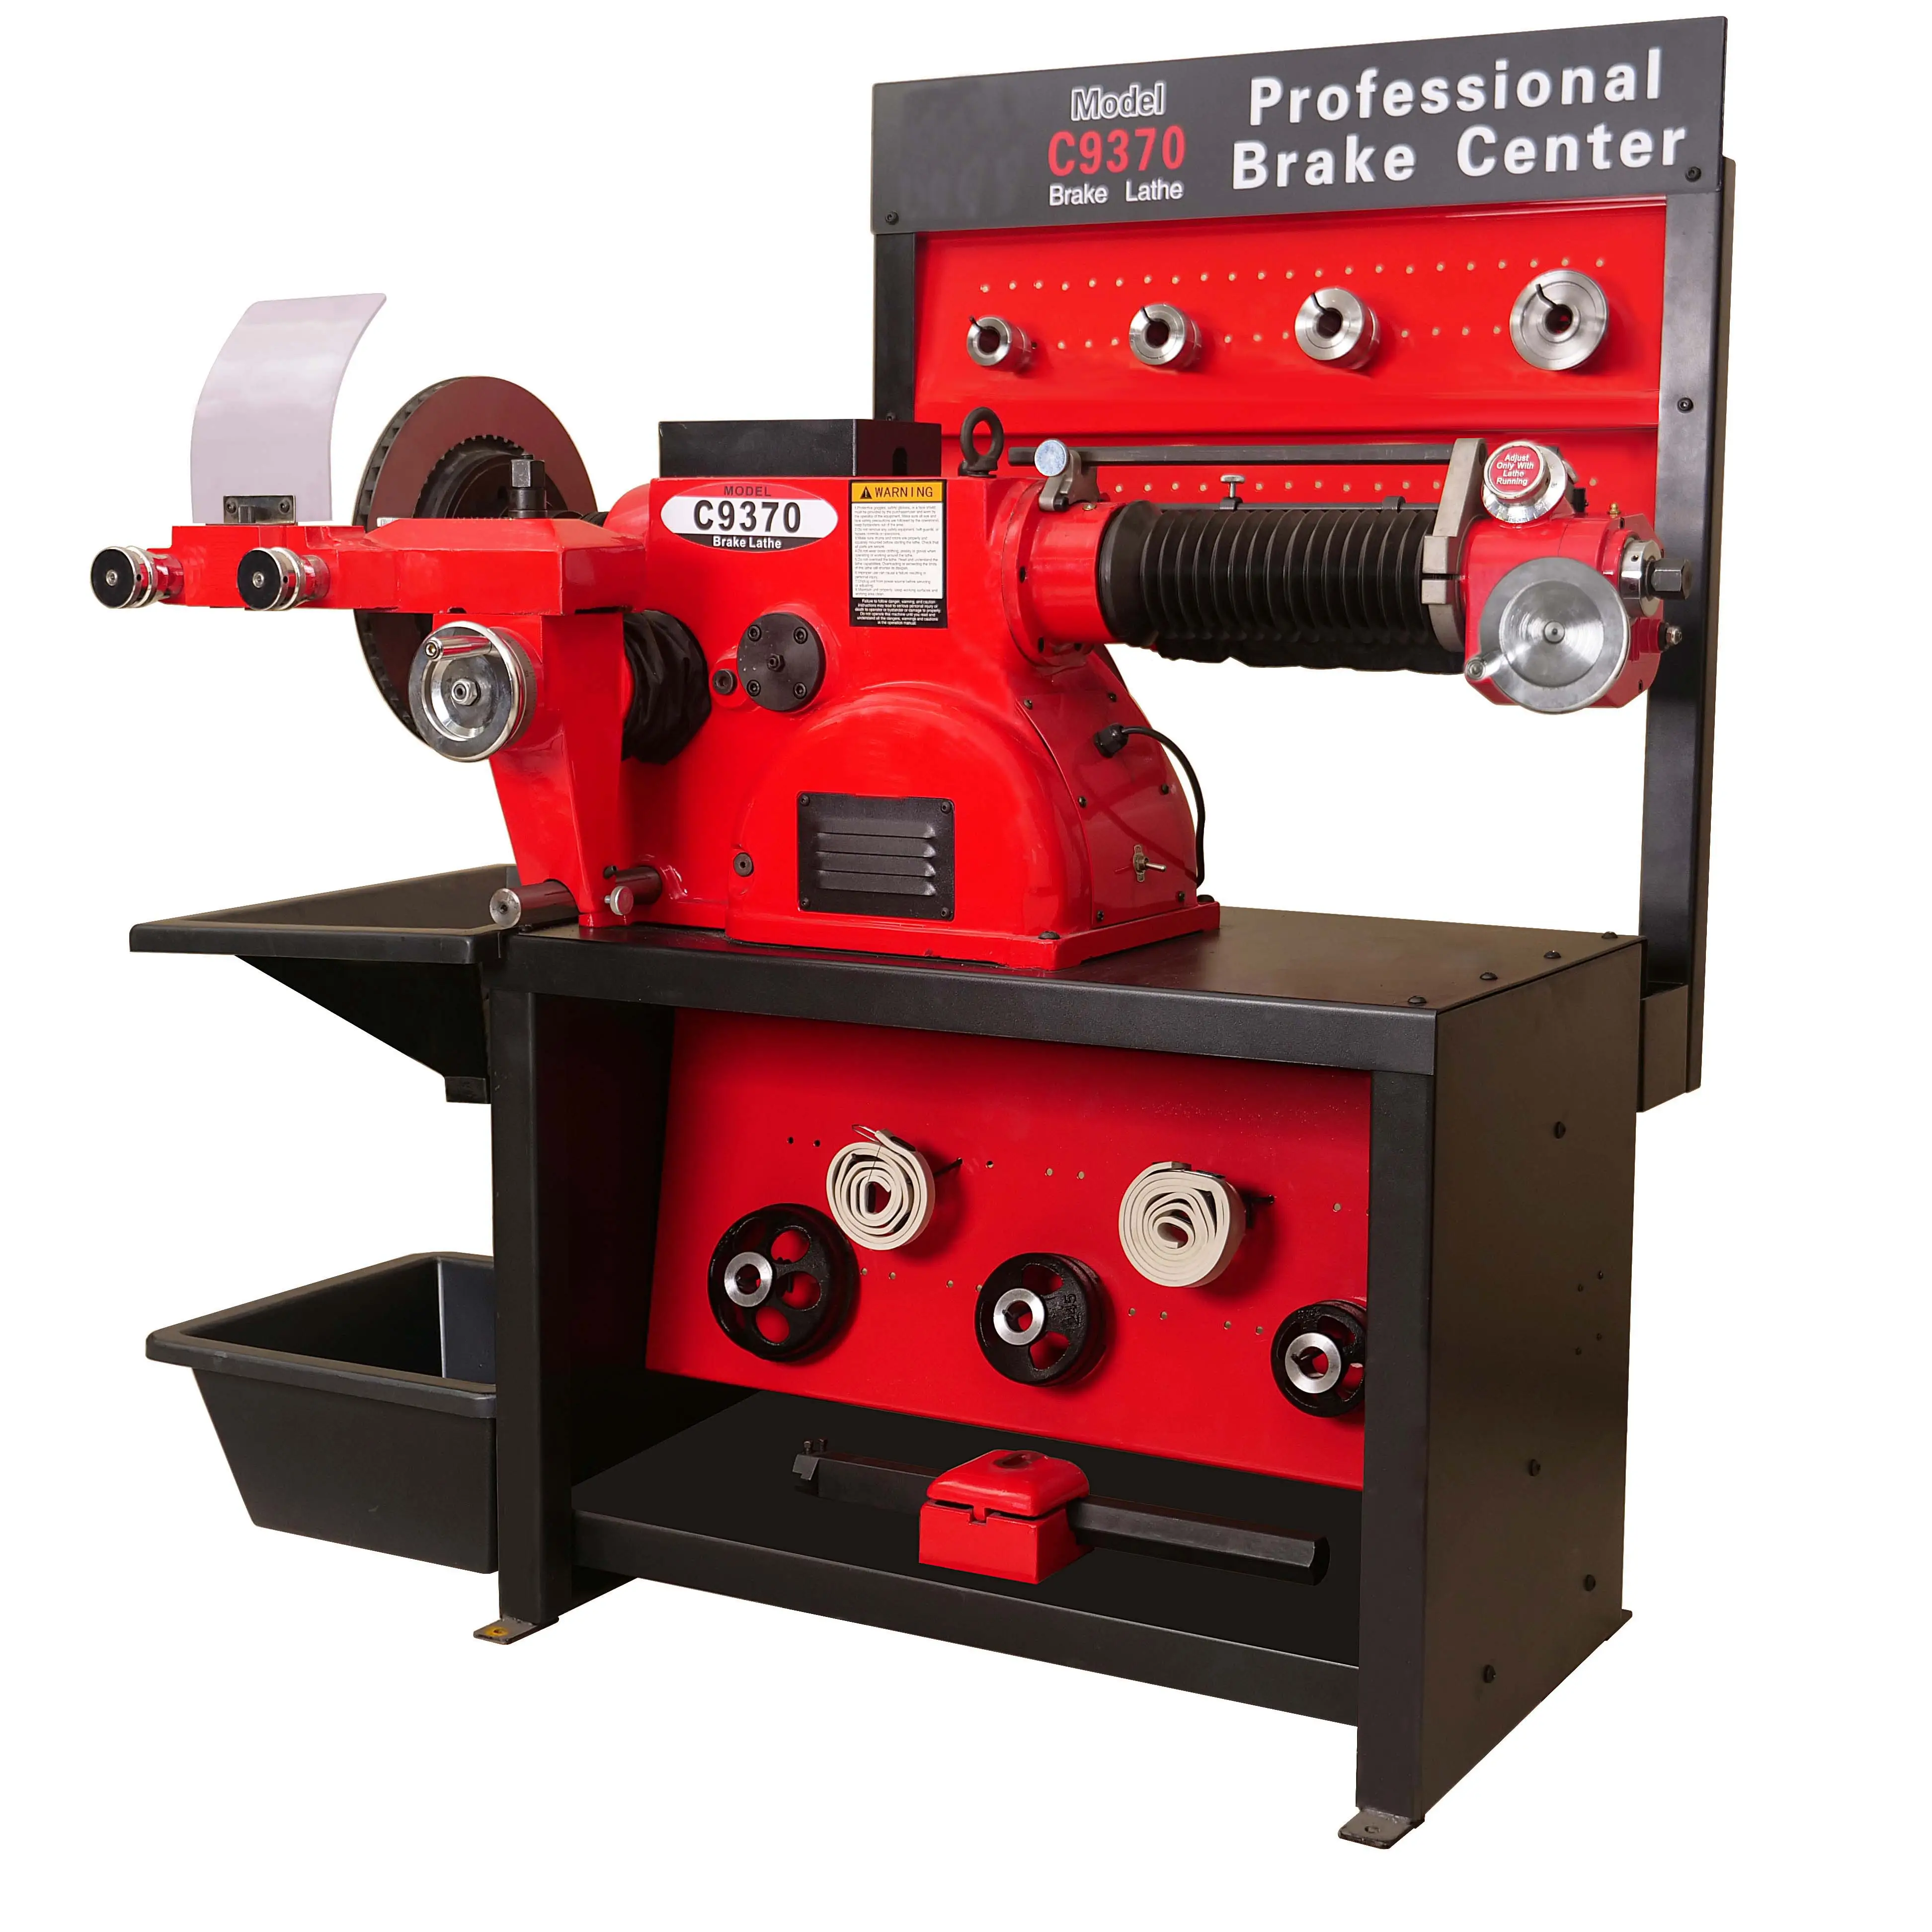 Full Automatic High Quality Drum and Disc Car Brake Cutting Lathe Machine with Best Price C9370